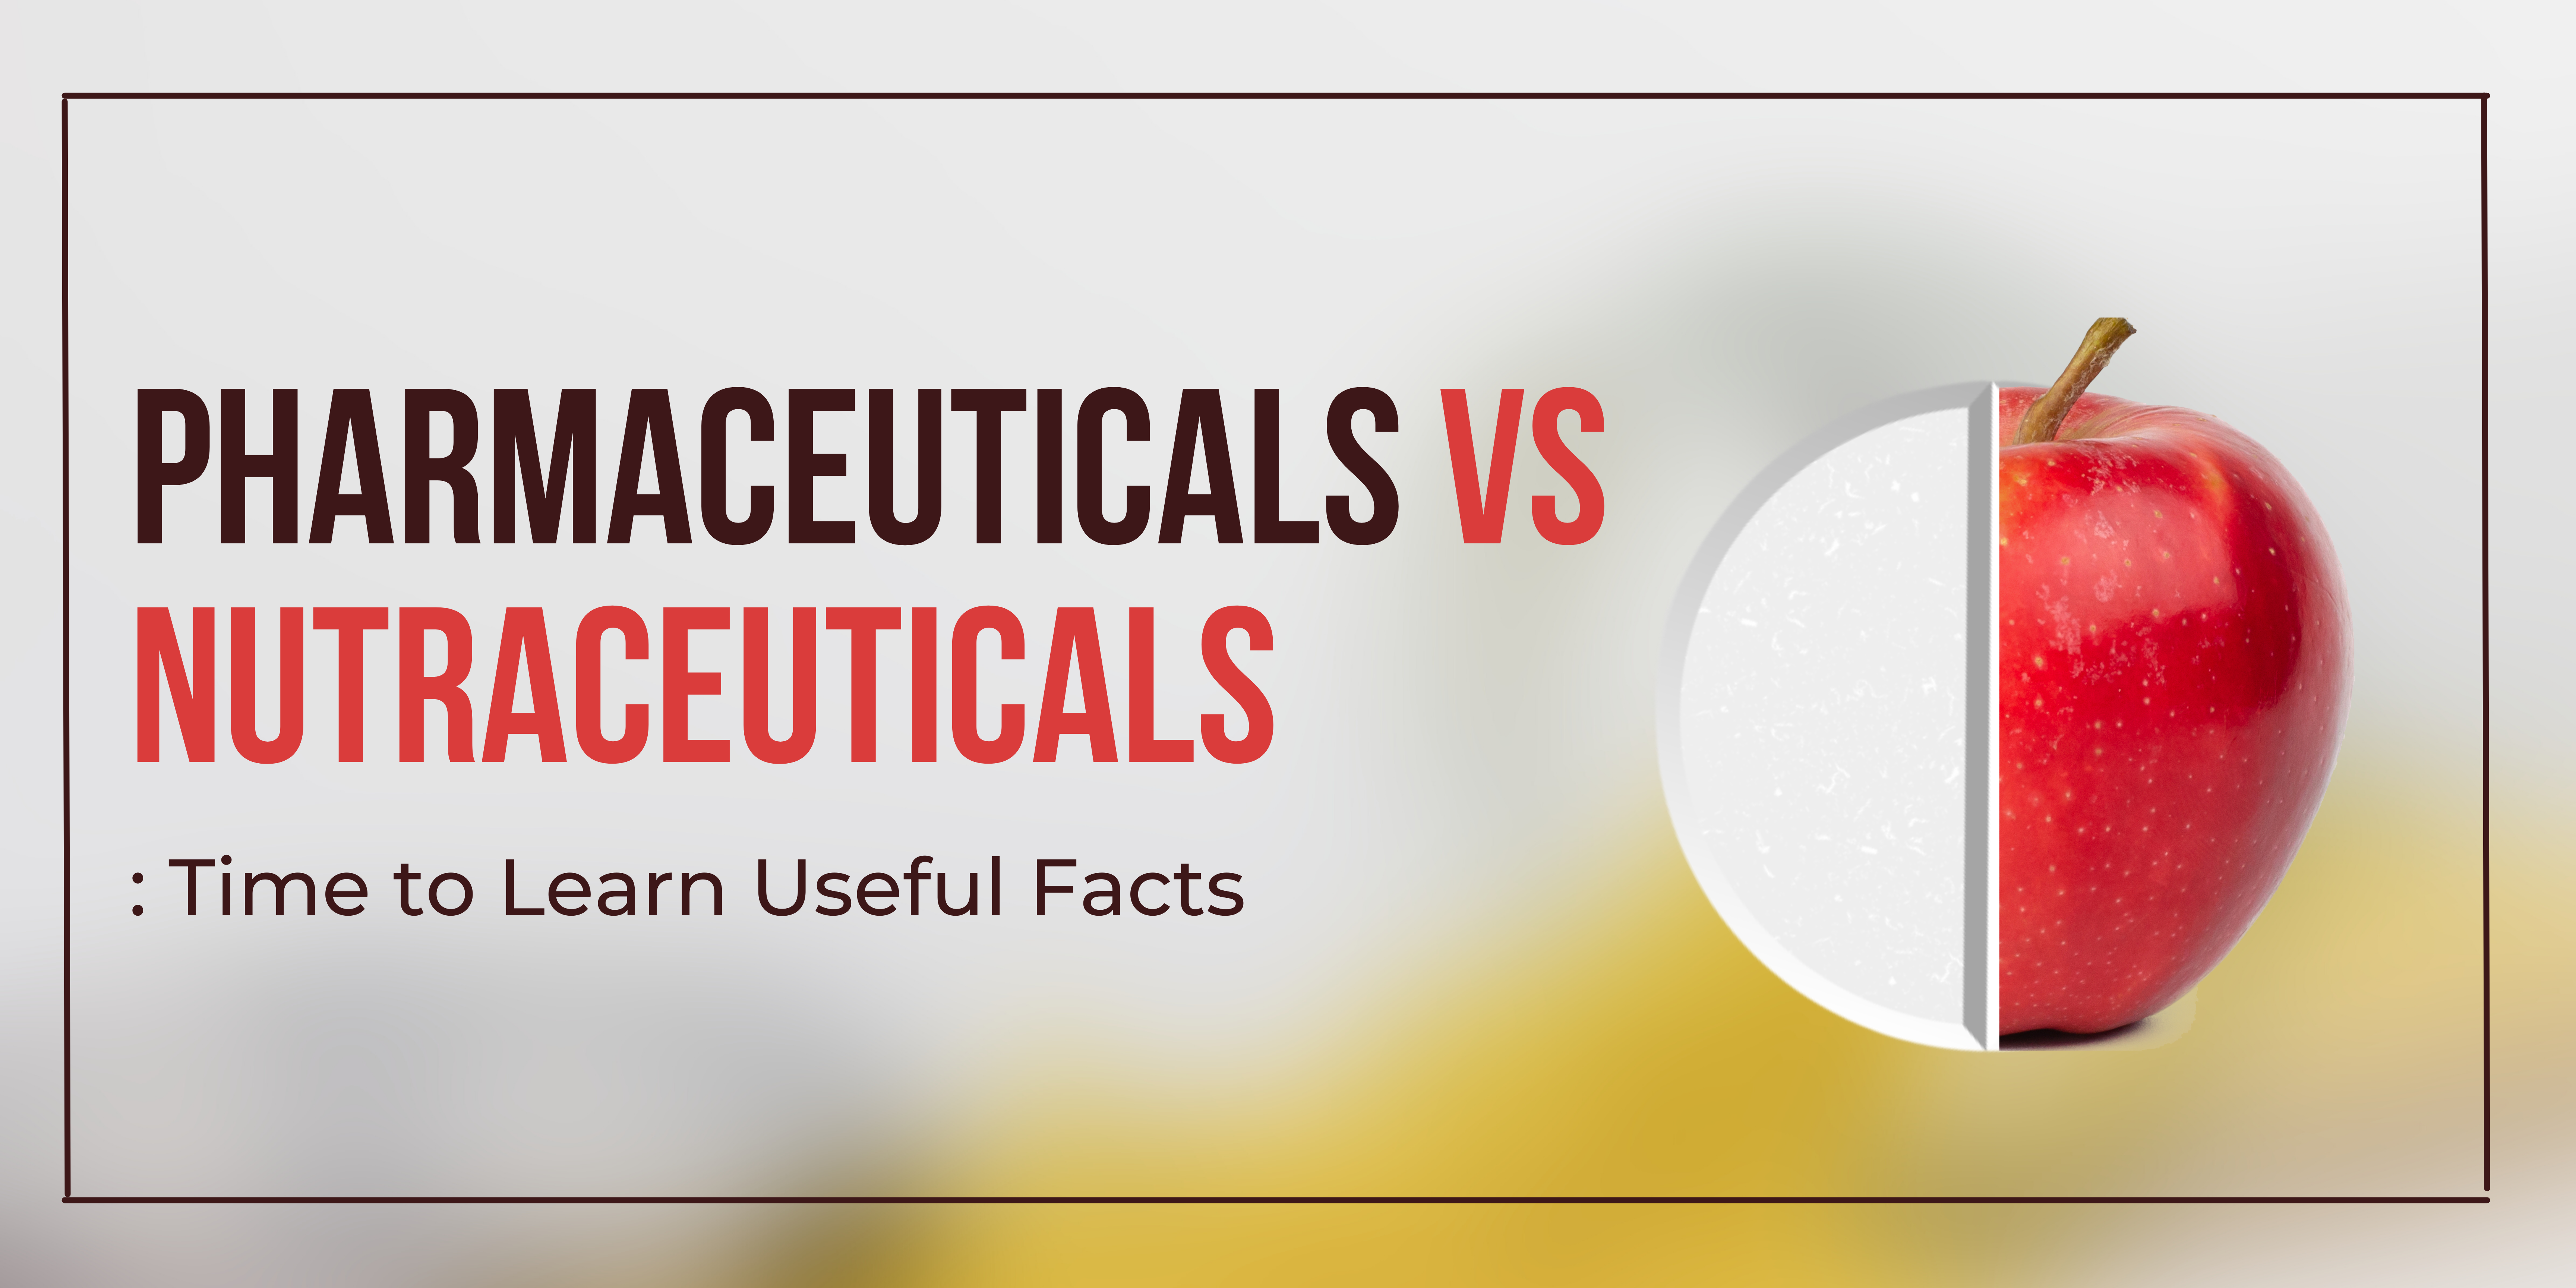 Pharmaceuticals vs Nutraceuticals: Time to Learn Useful Facts